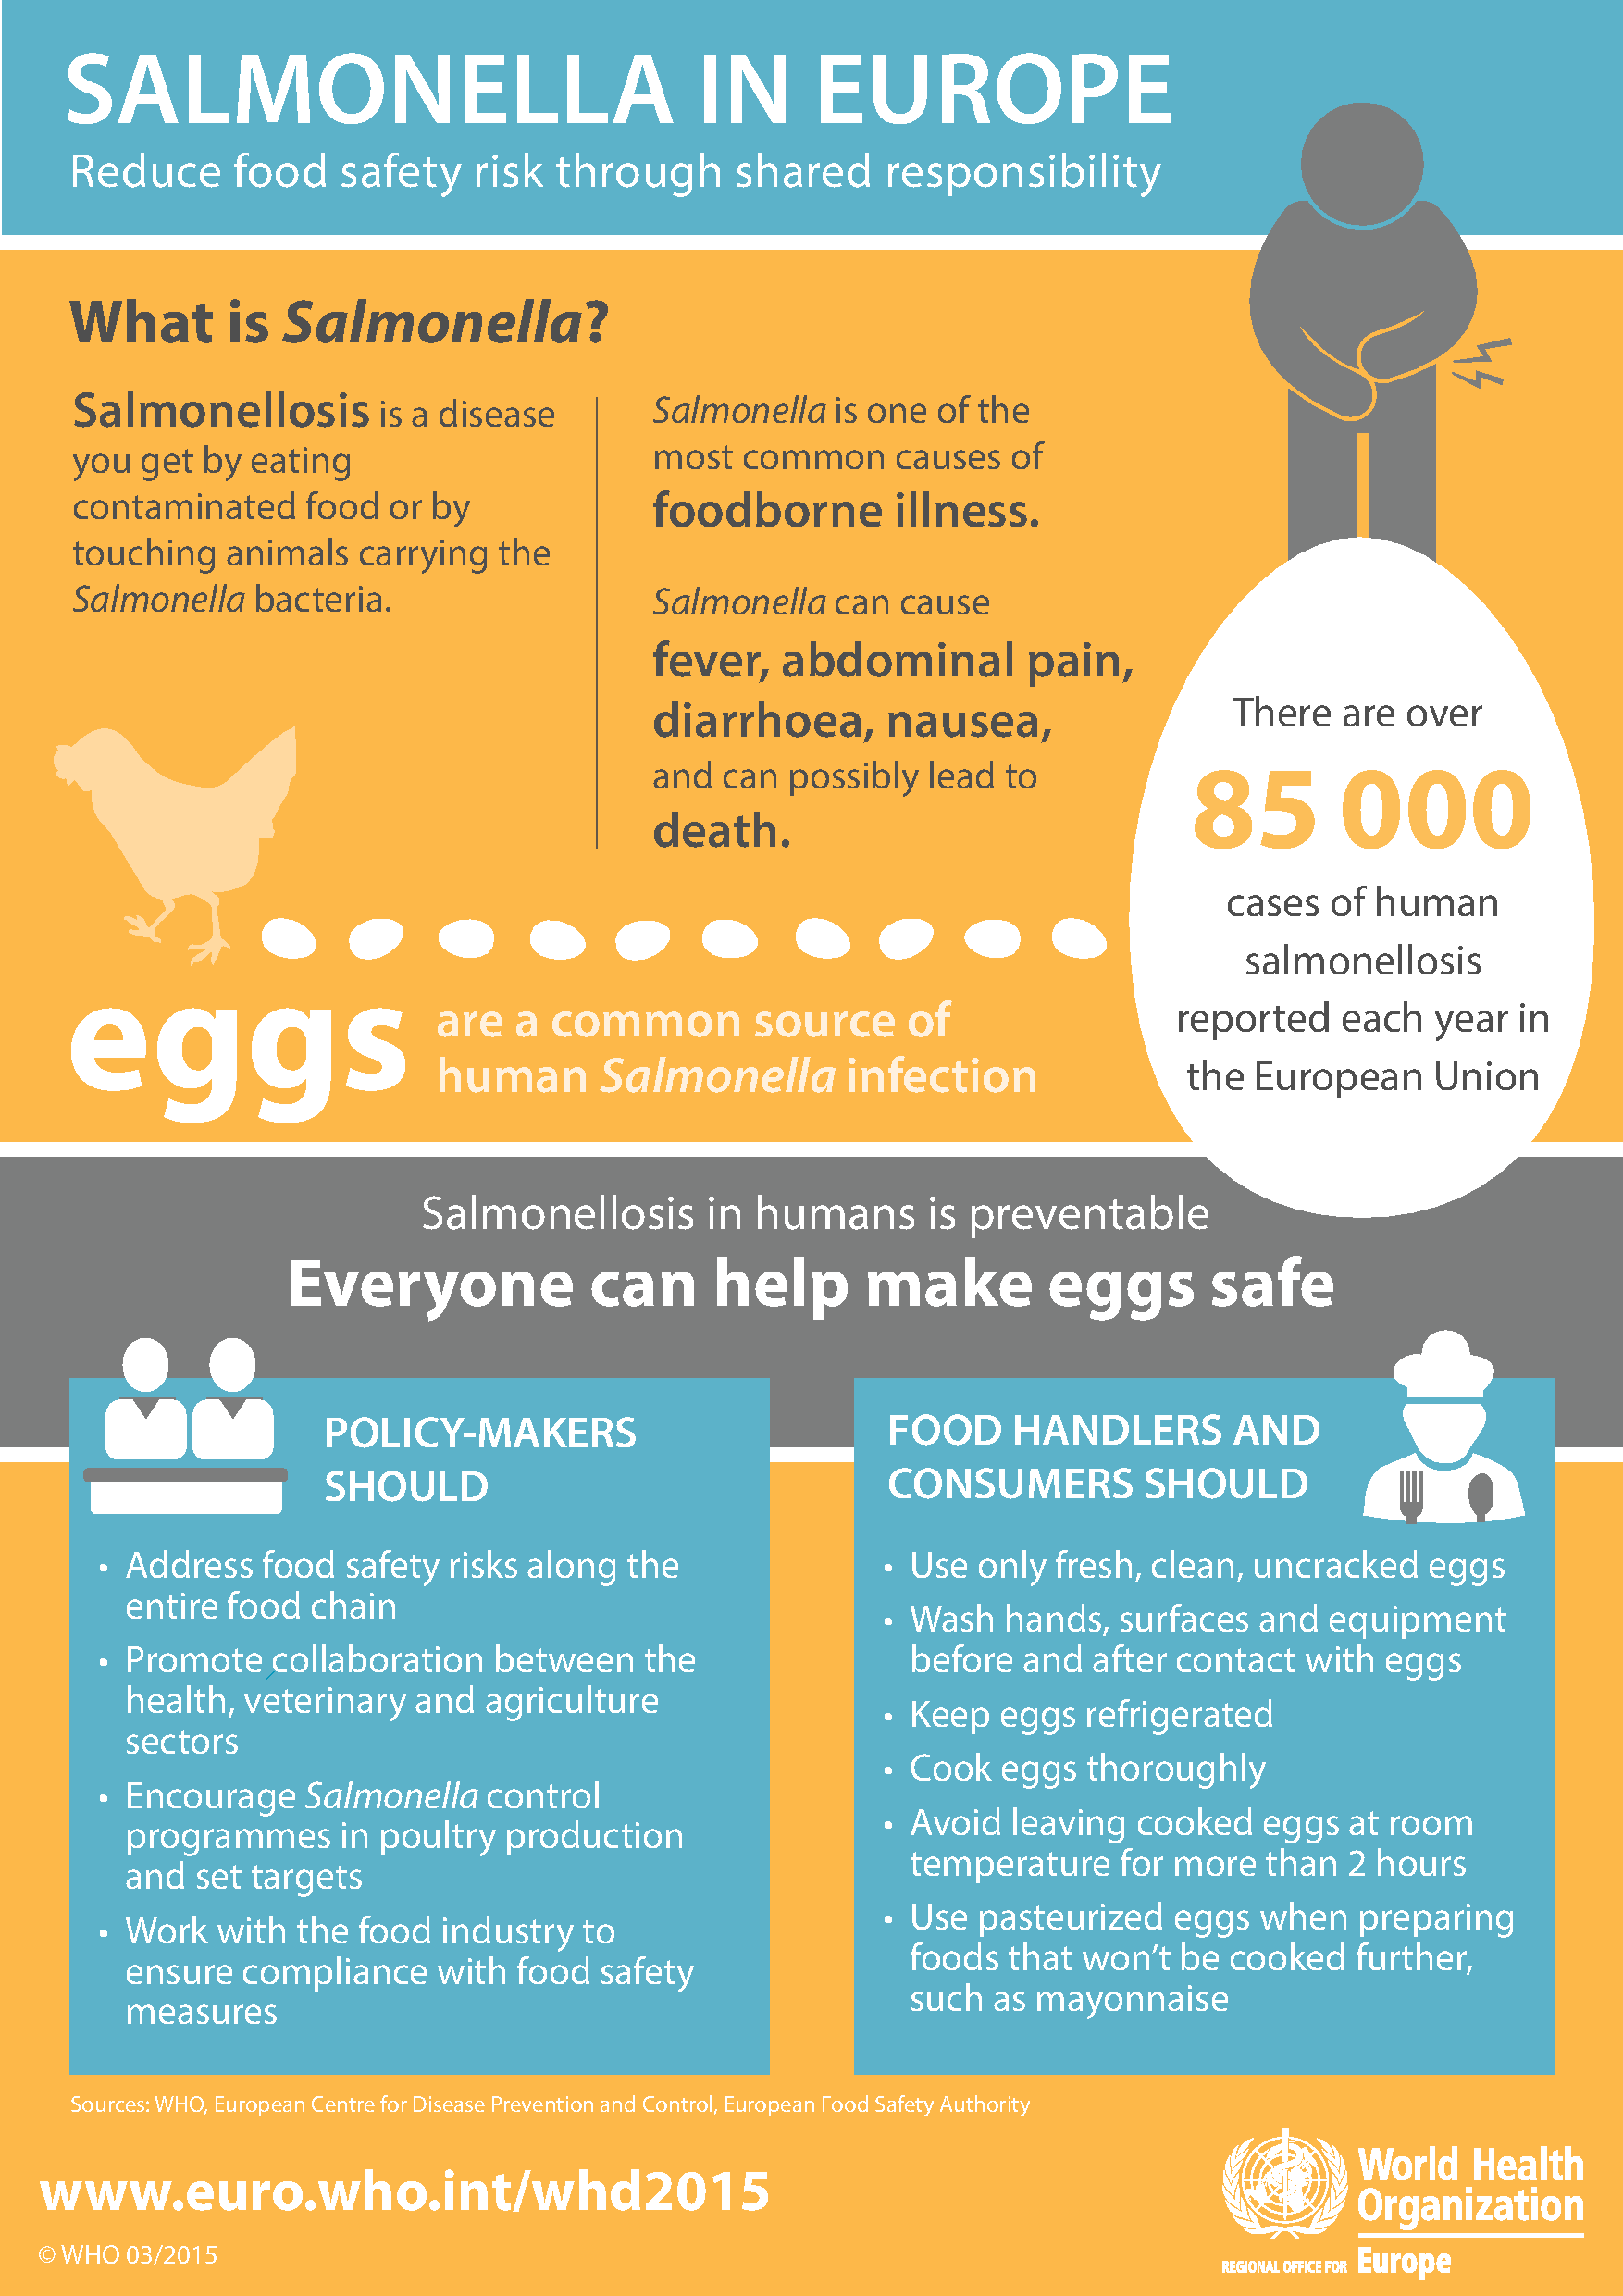 Salmonella in Europe: Reduce food safety risk through shared responsibility